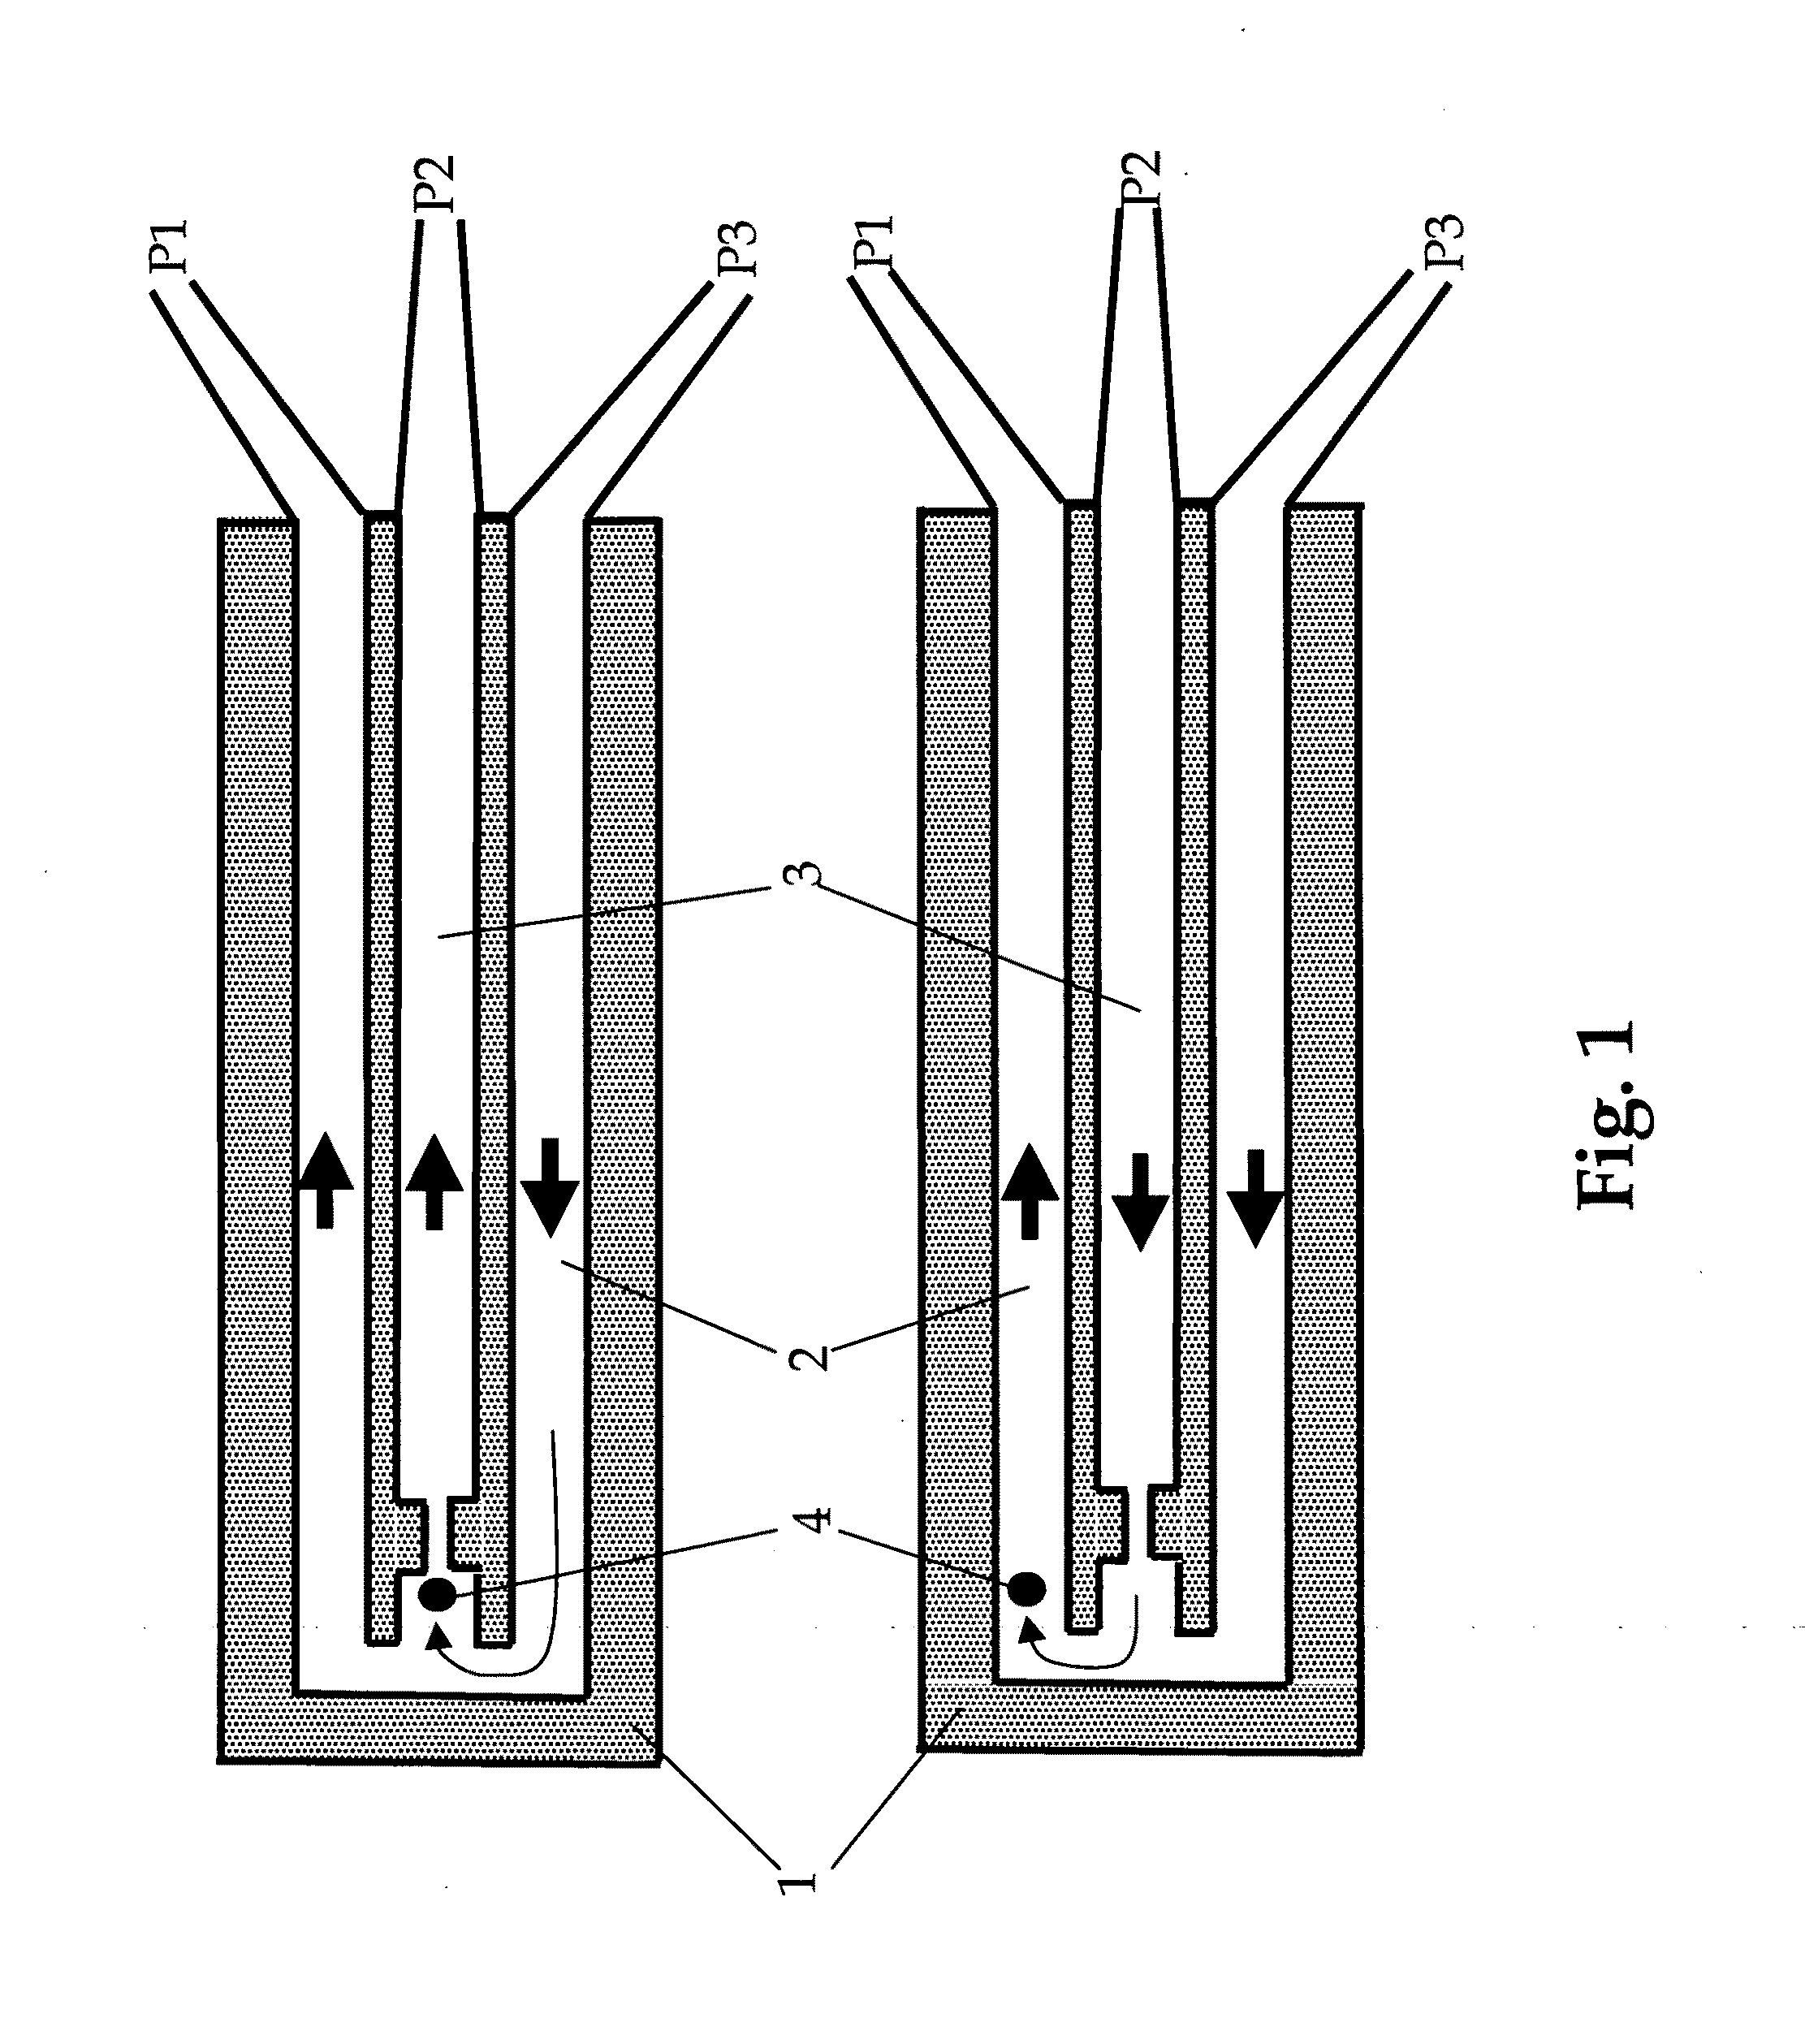 Method and apparatus for trapping single particles in microfluidic channels